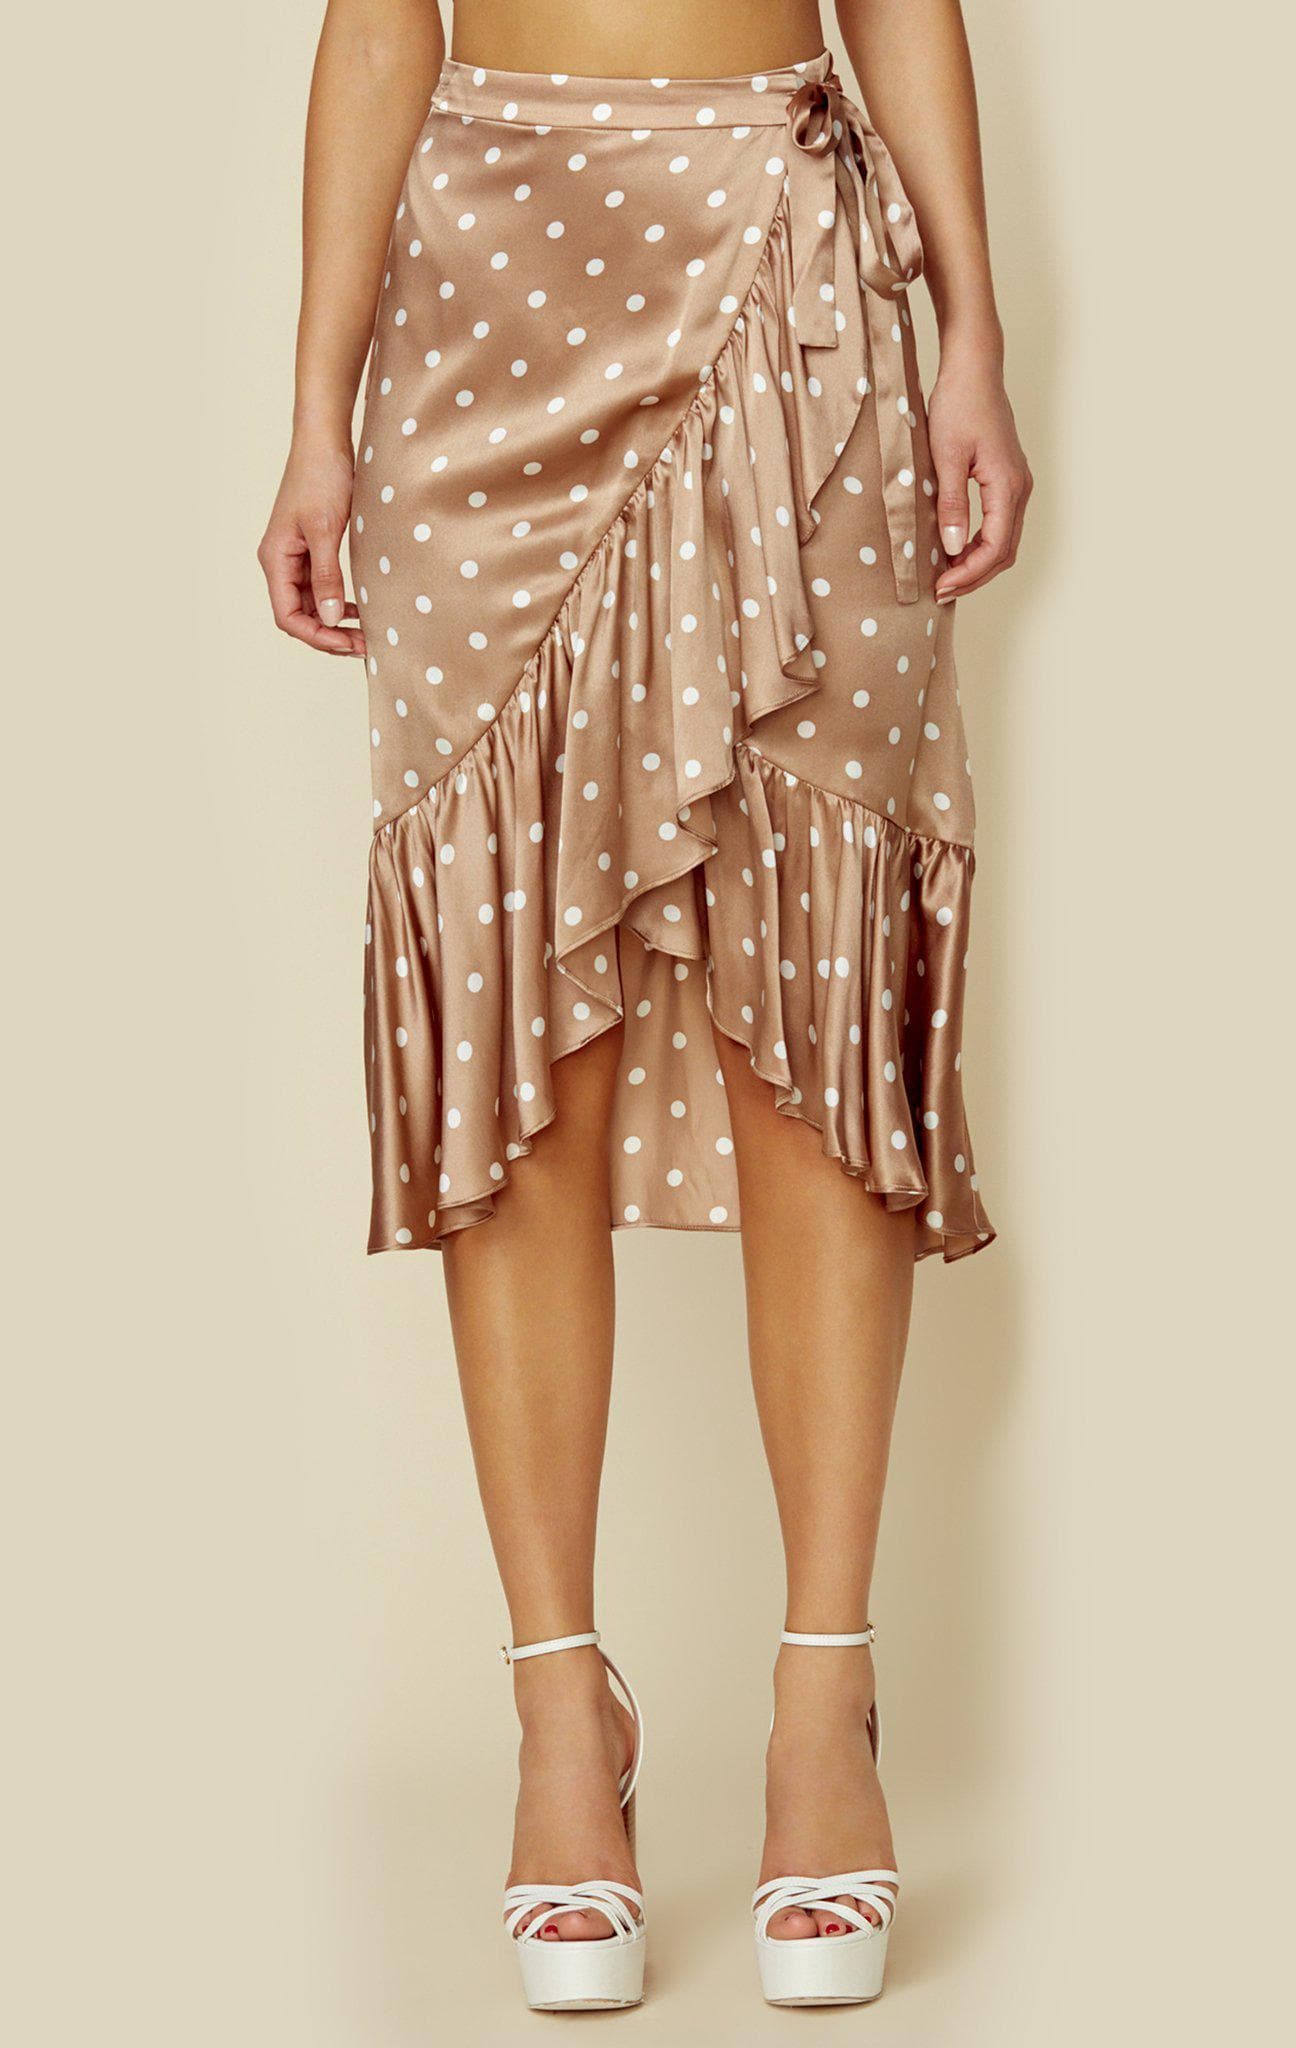 CAMI NYC THE MILEY RUFFLE SKIRT - LATTE VINTAGE